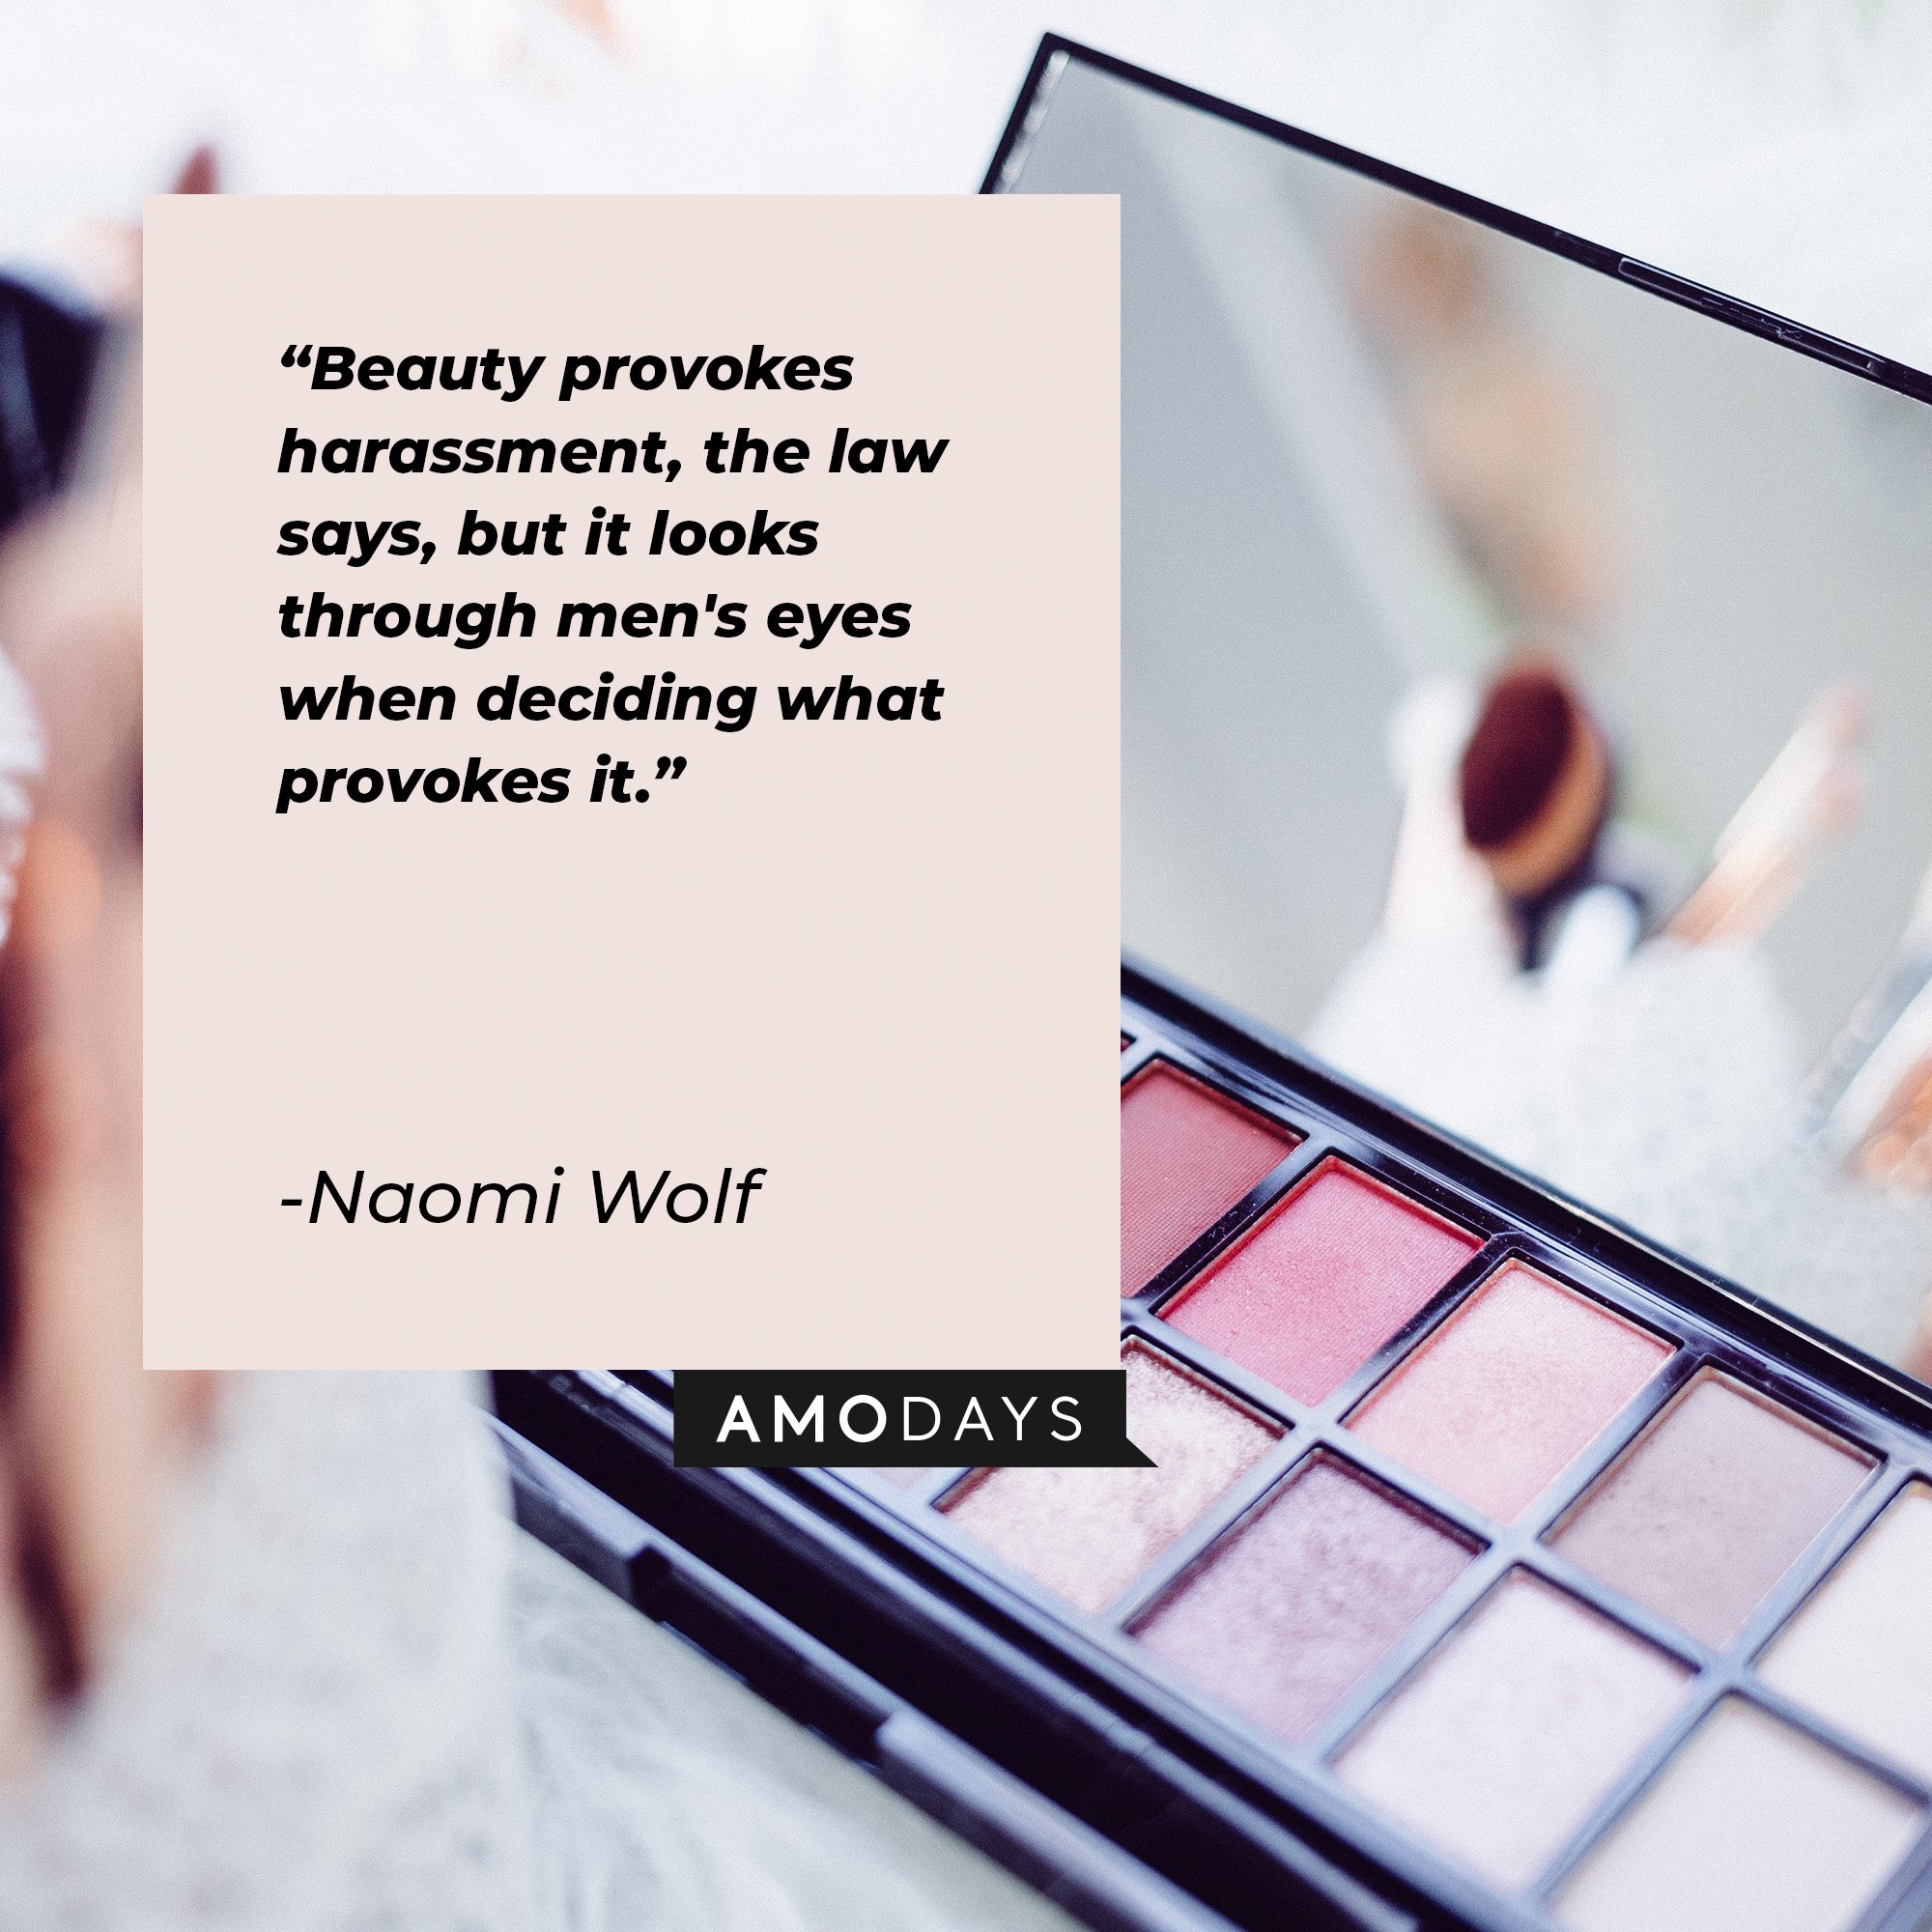 Naomi Wolf’s quote: "Beauty provokes harassment, the law says, but it looks through men's eyes when deciding what provokes it." | Image: AmoDays  